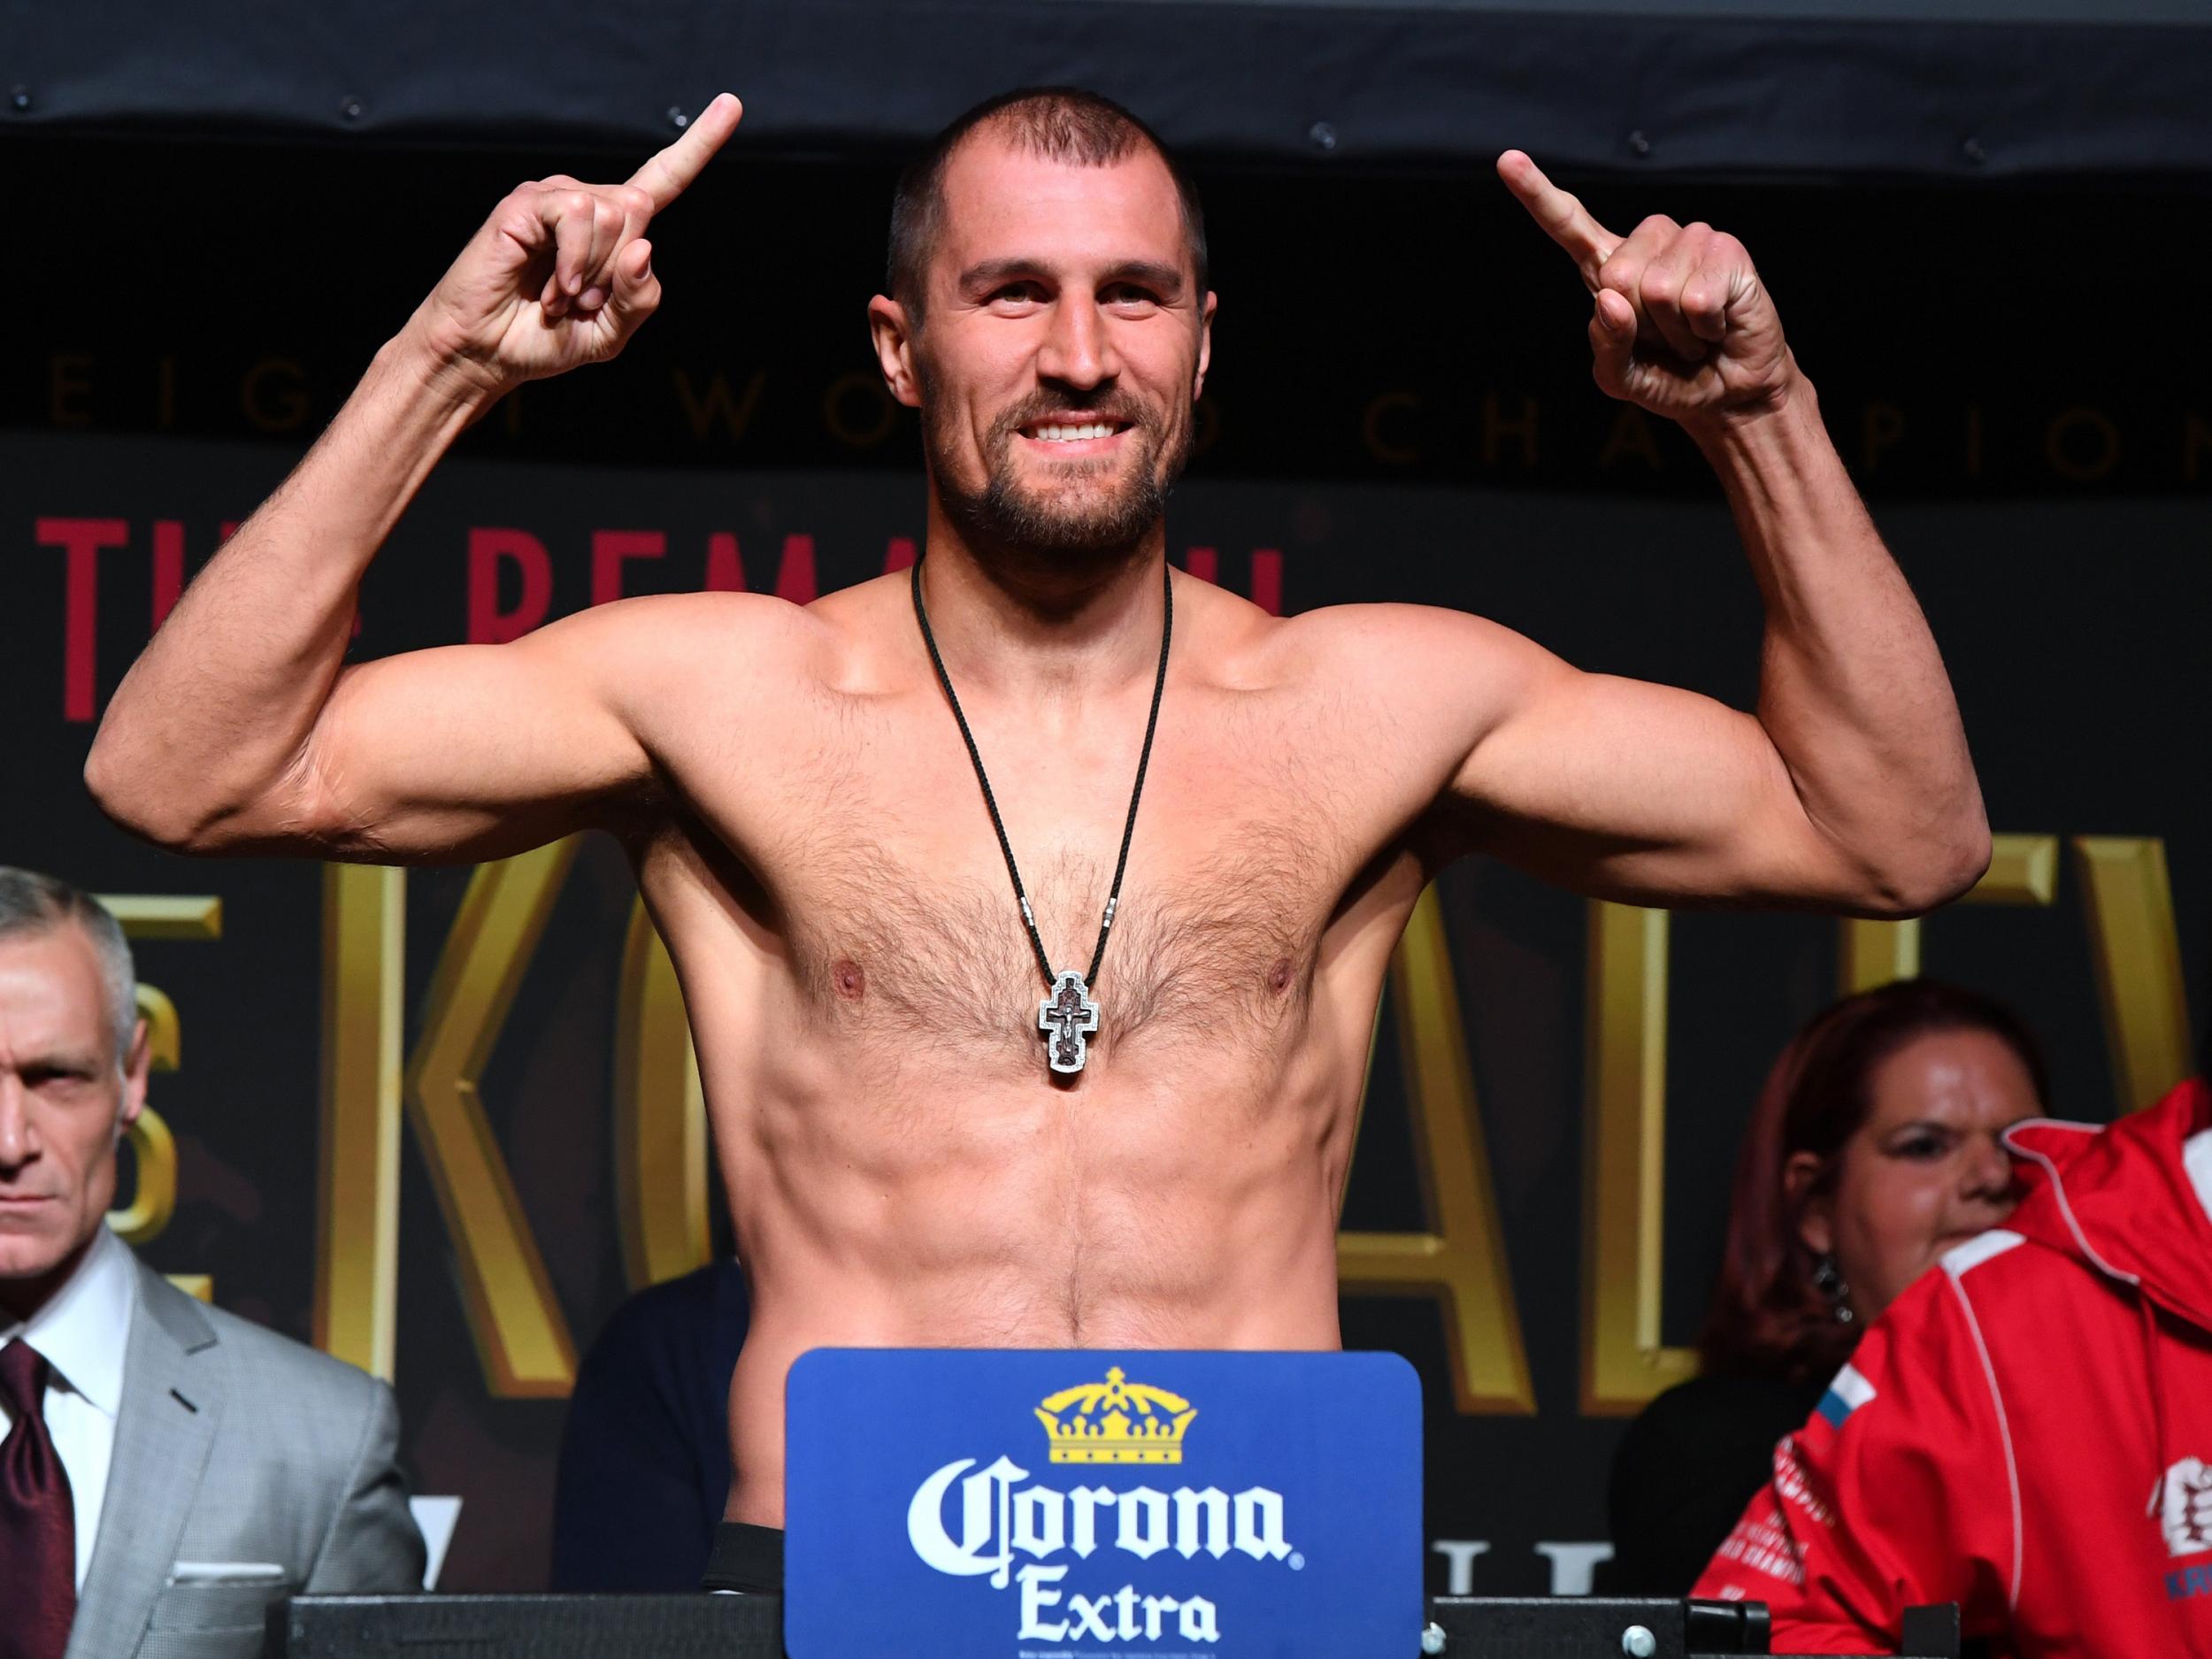 Kovalev's loss in the original match was the first of his career